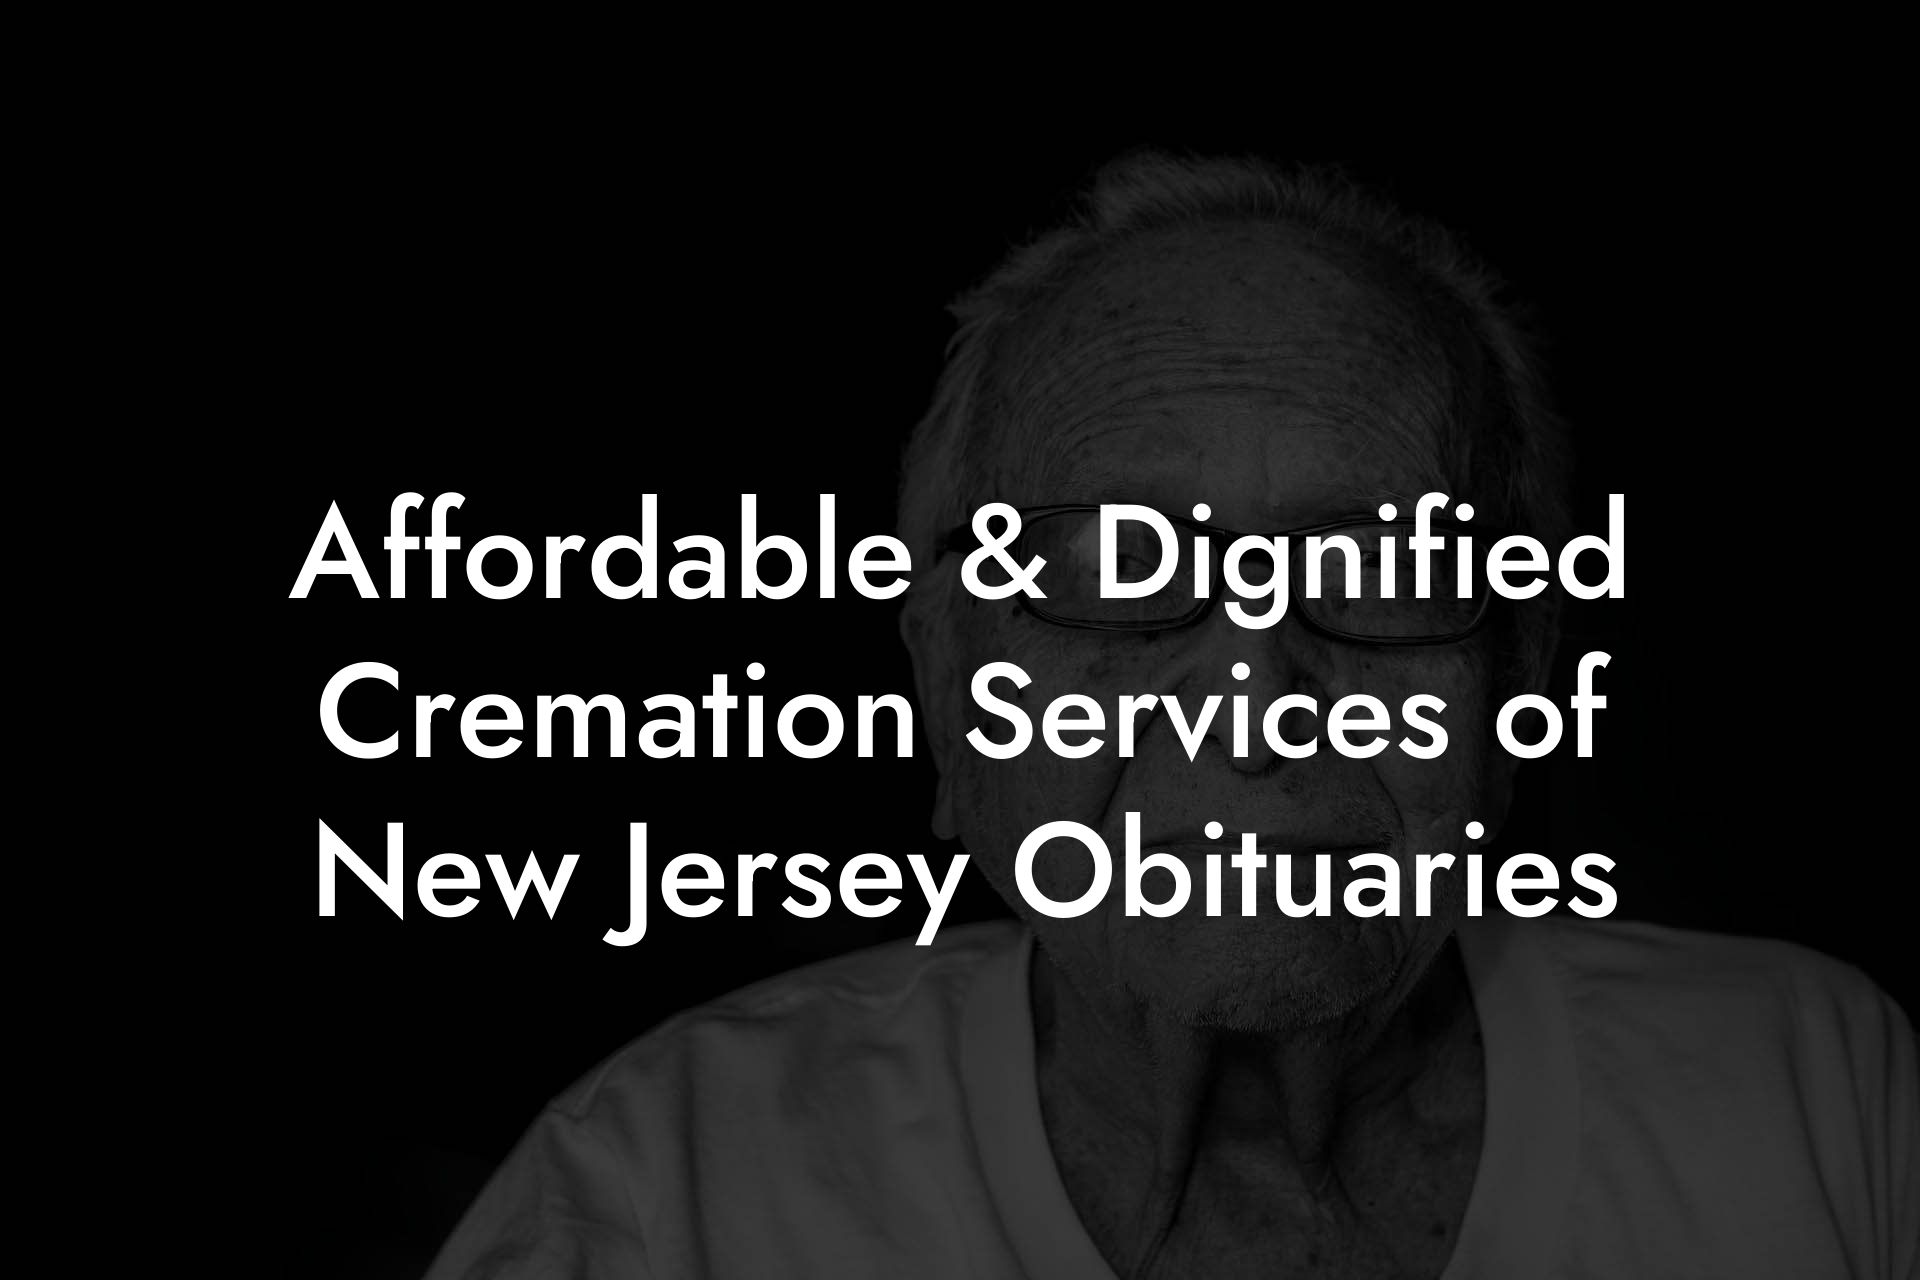 Affordable & Dignified Cremation Services of New Jersey Obituaries